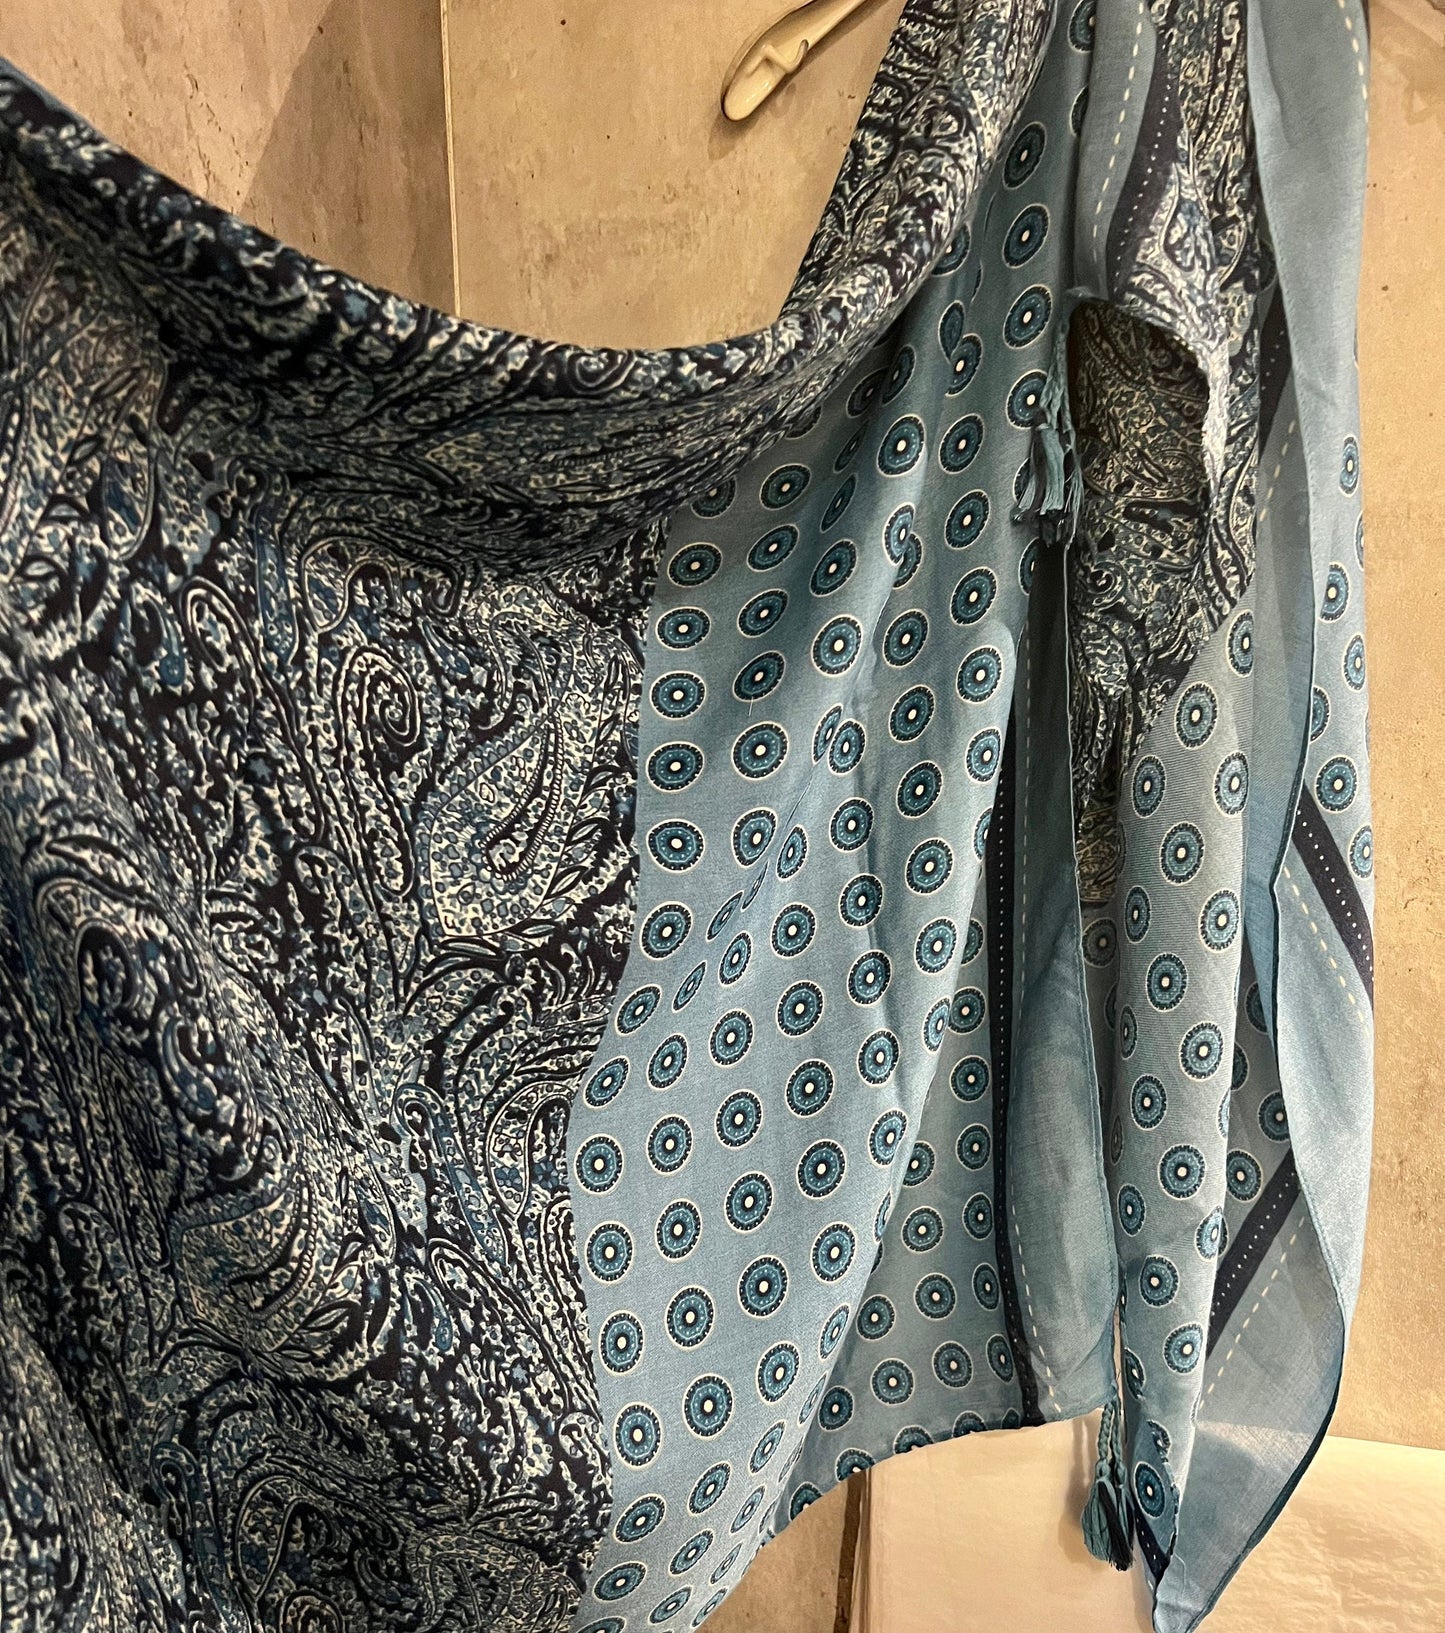 Modern Paisley With Tassels Blue Cotton Scarf/Summer Autumn Winter Scarf/Gifts For Mum/Gifts For Her Birthday Christmas/UK Seller